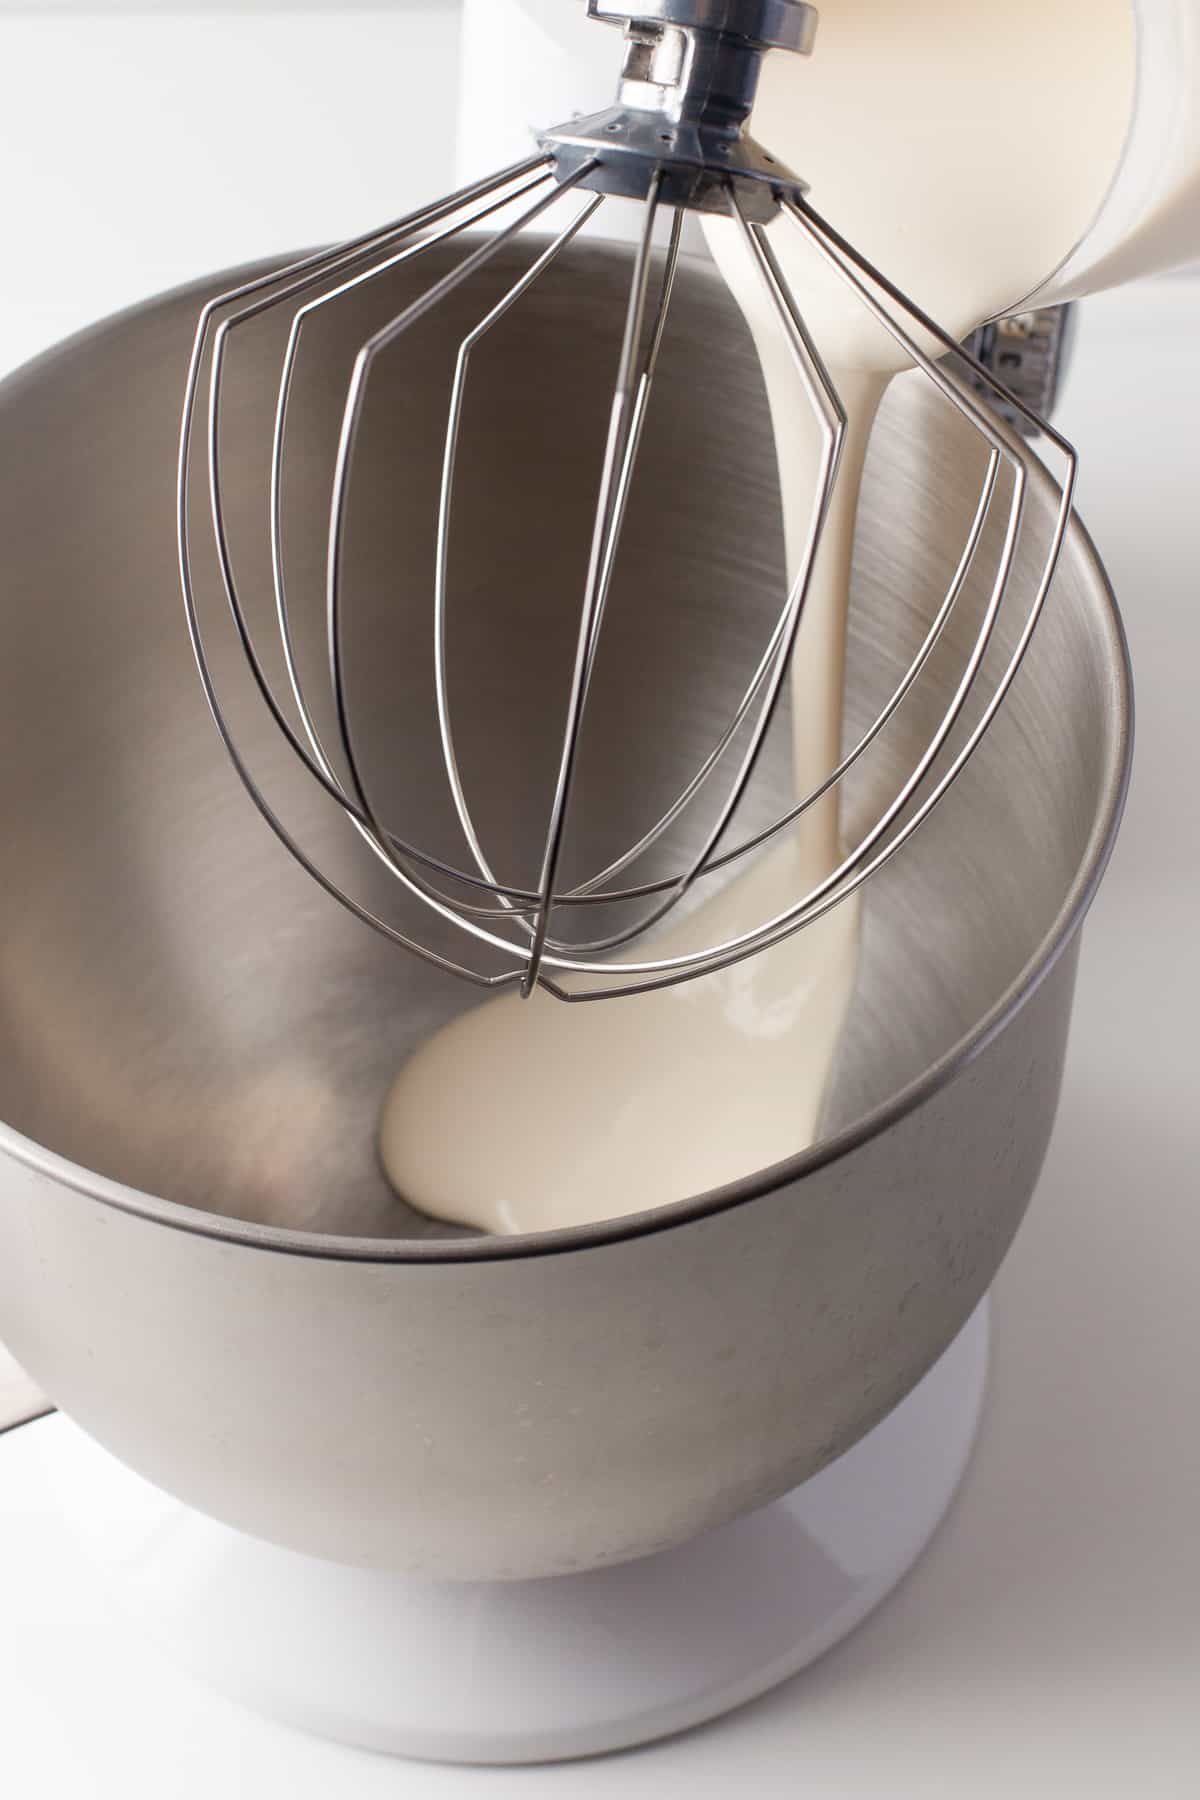 Heavy cream being poured into a metal bowl of a stand mixer with a whisk attachment.